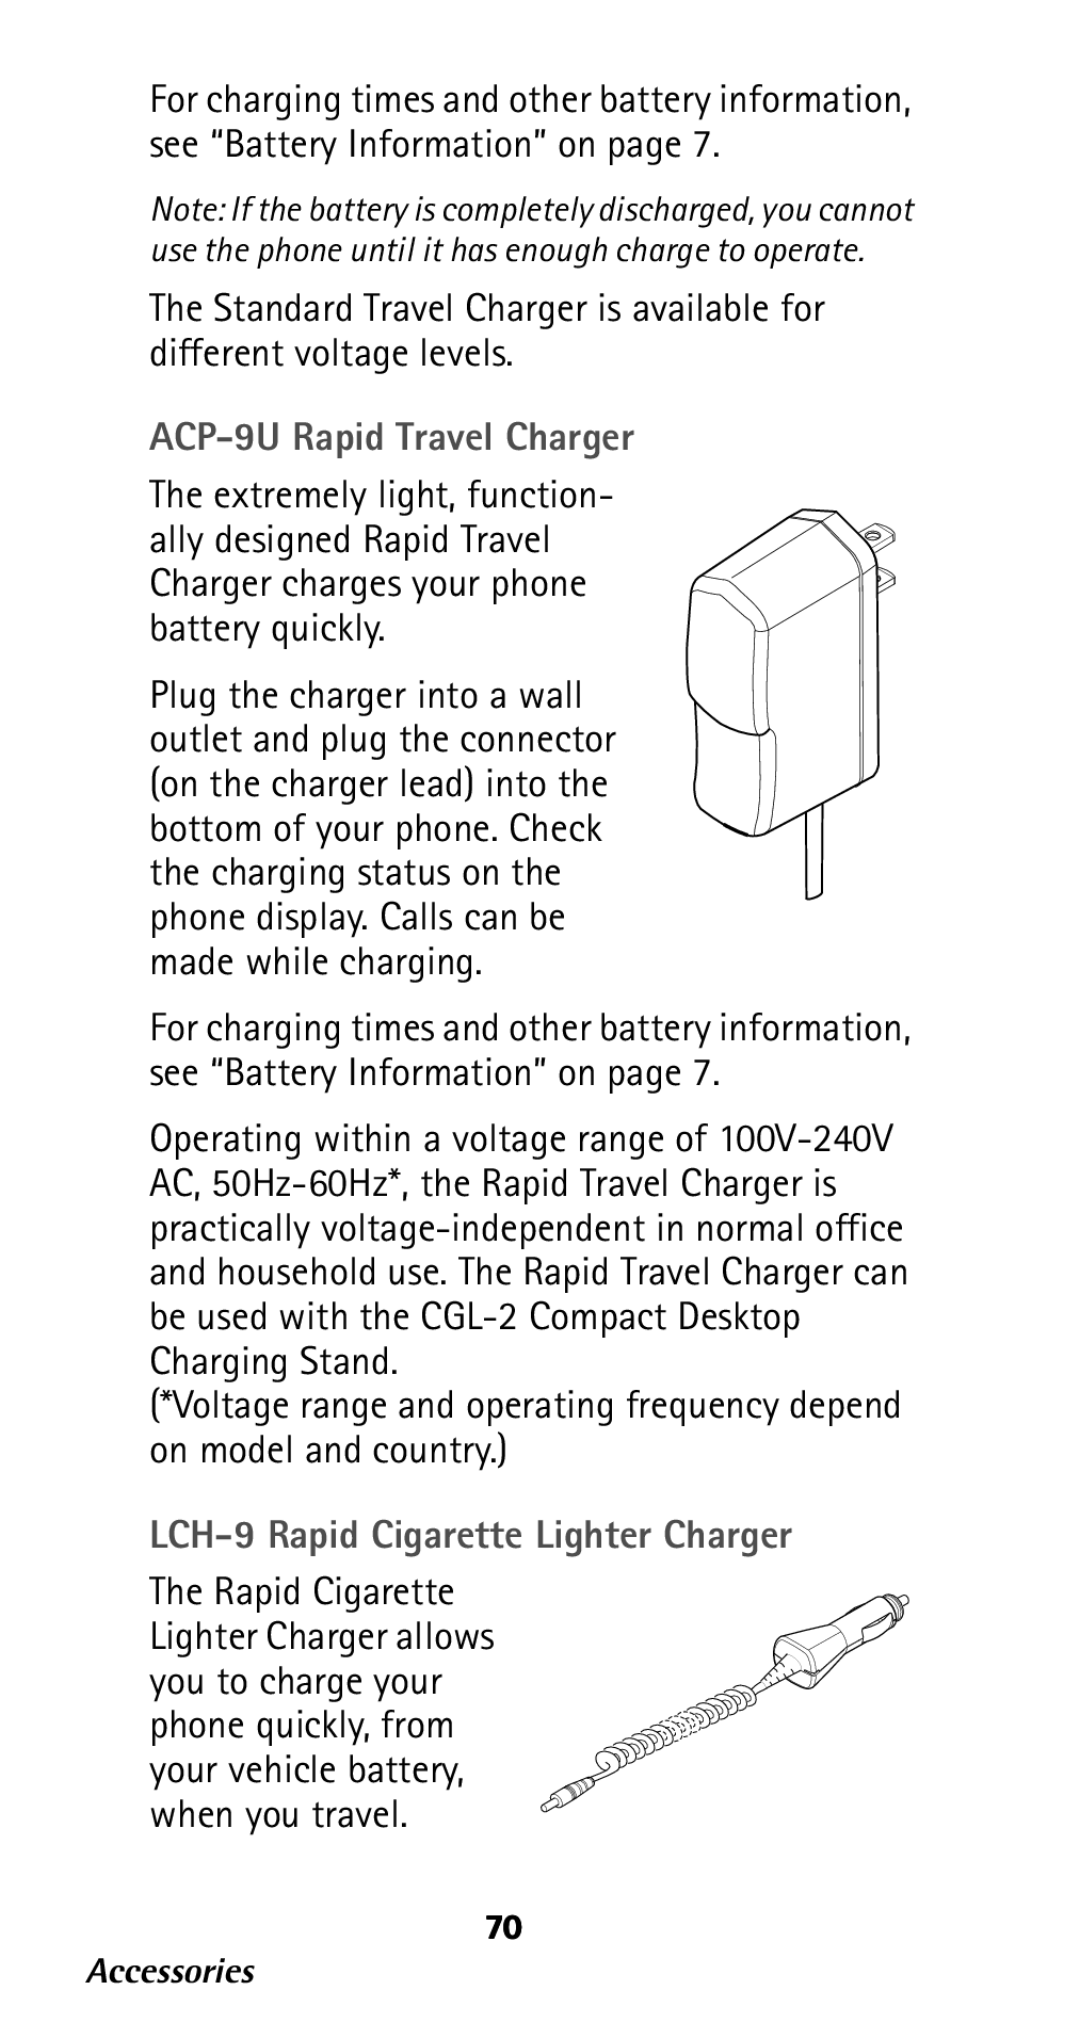 Nokia 282 owner manual ACP-9U Rapid Travel Charger, LCH-9 Rapid Cigarette Lighter Charger 